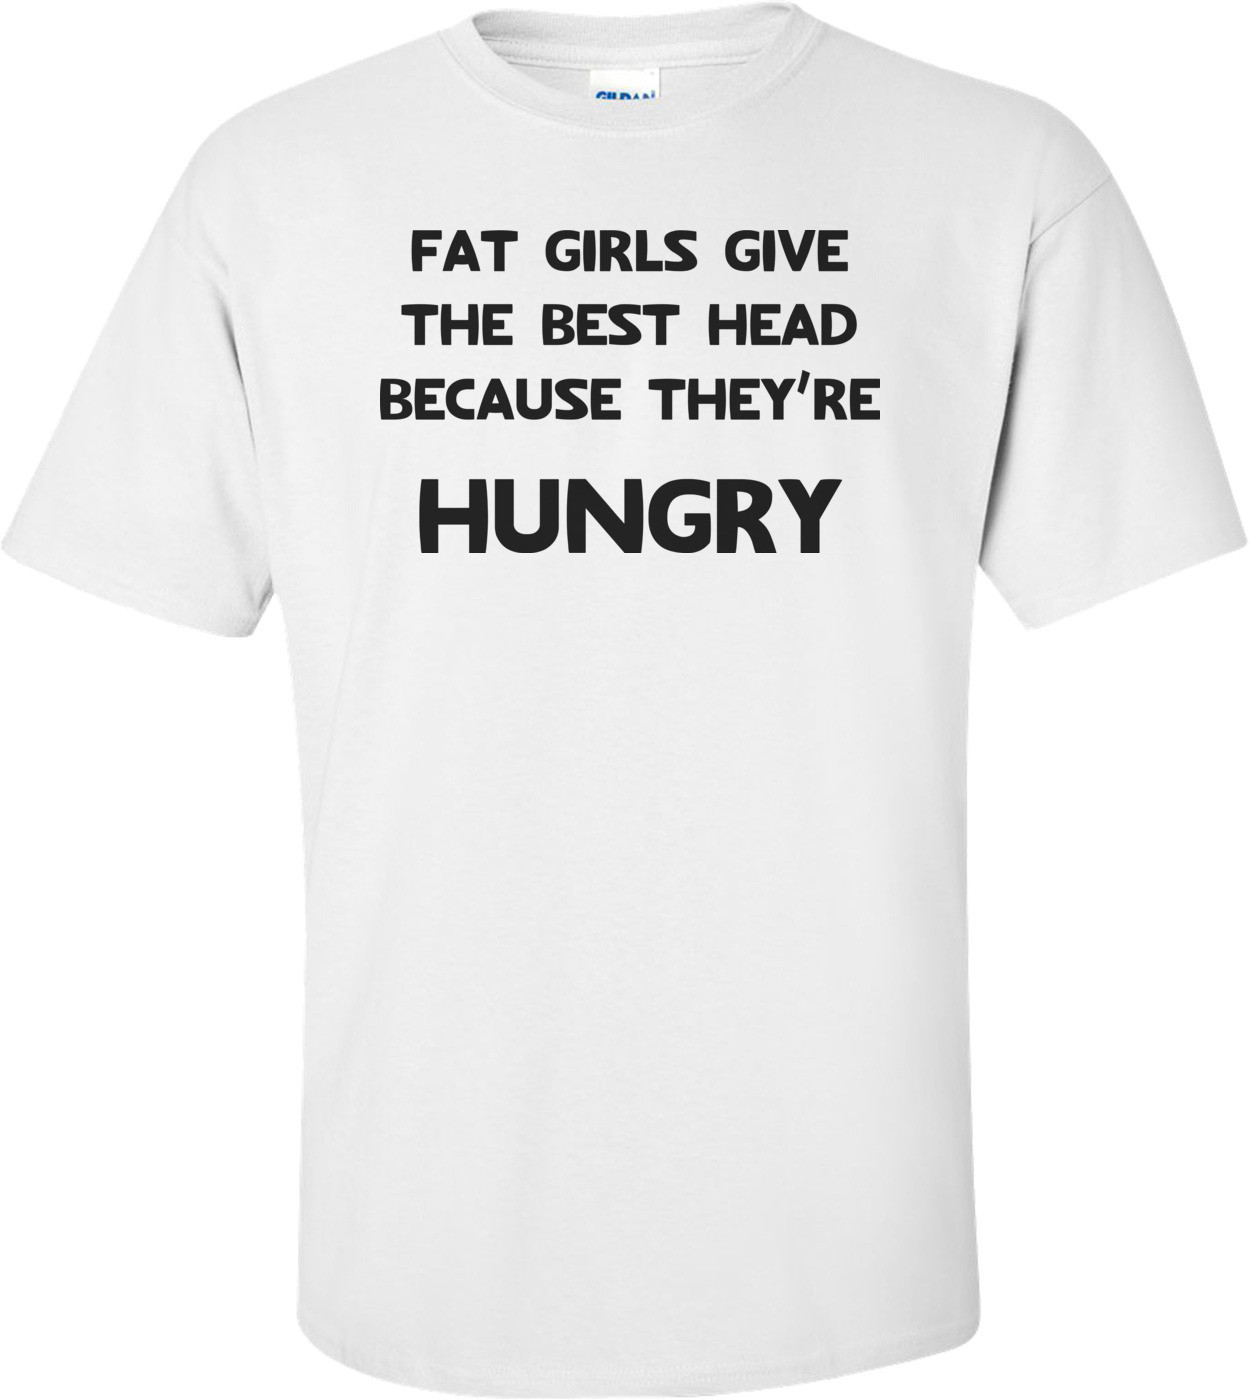 Fat Girls Give The Best Head Because They're Hungry Funny Shirt